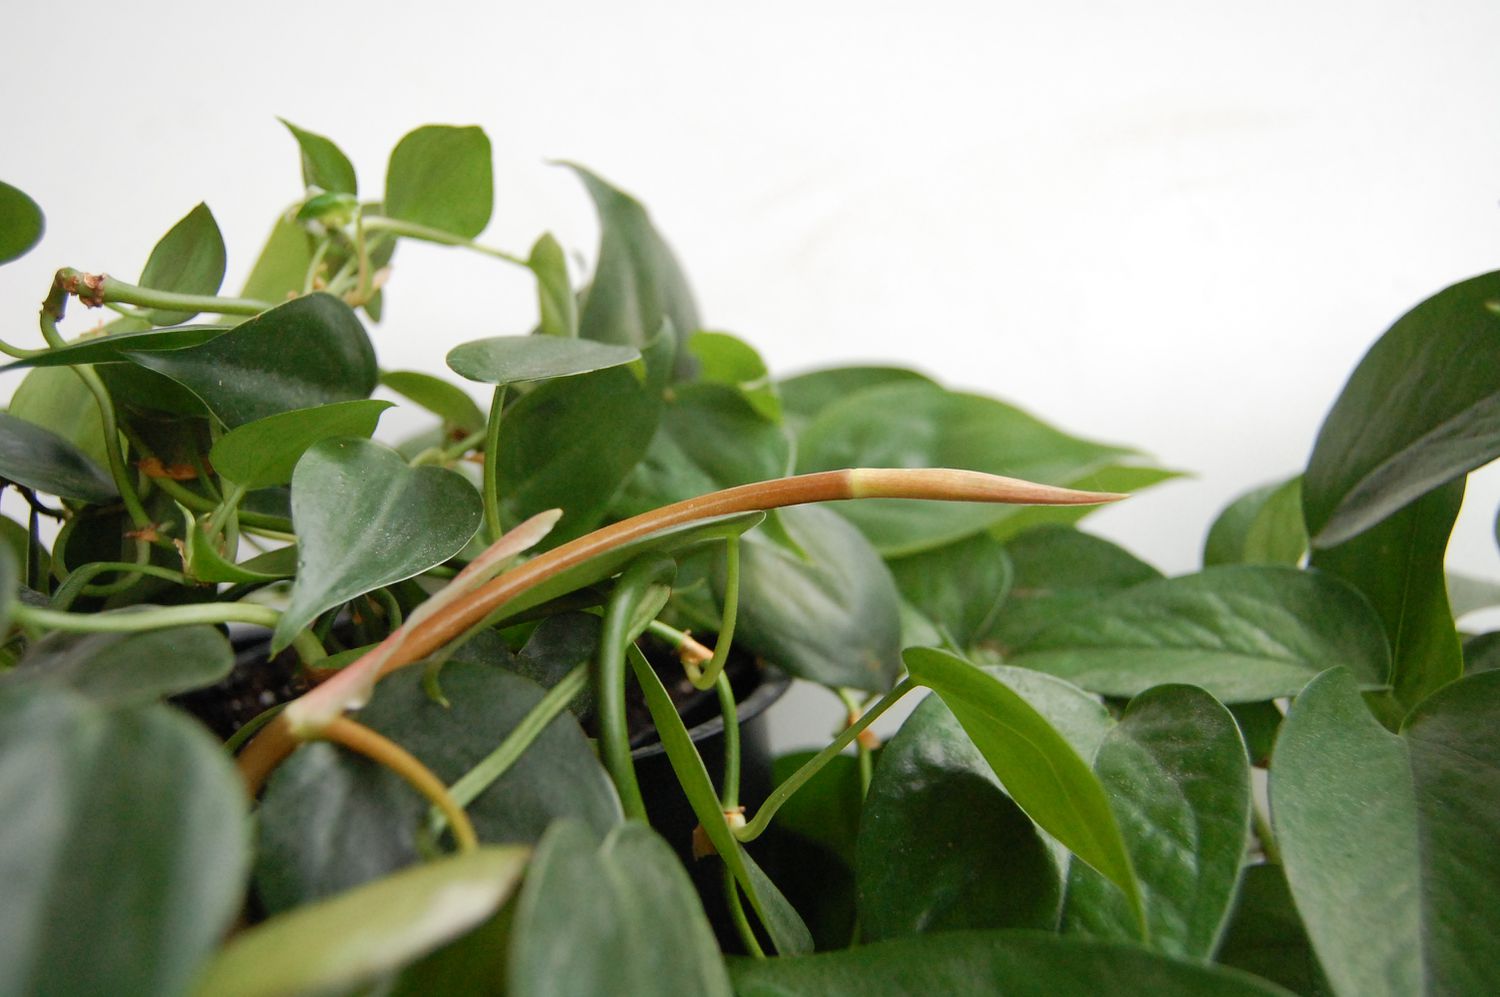 A close up shot of a new pothos leaf emerging from a cataphyl.